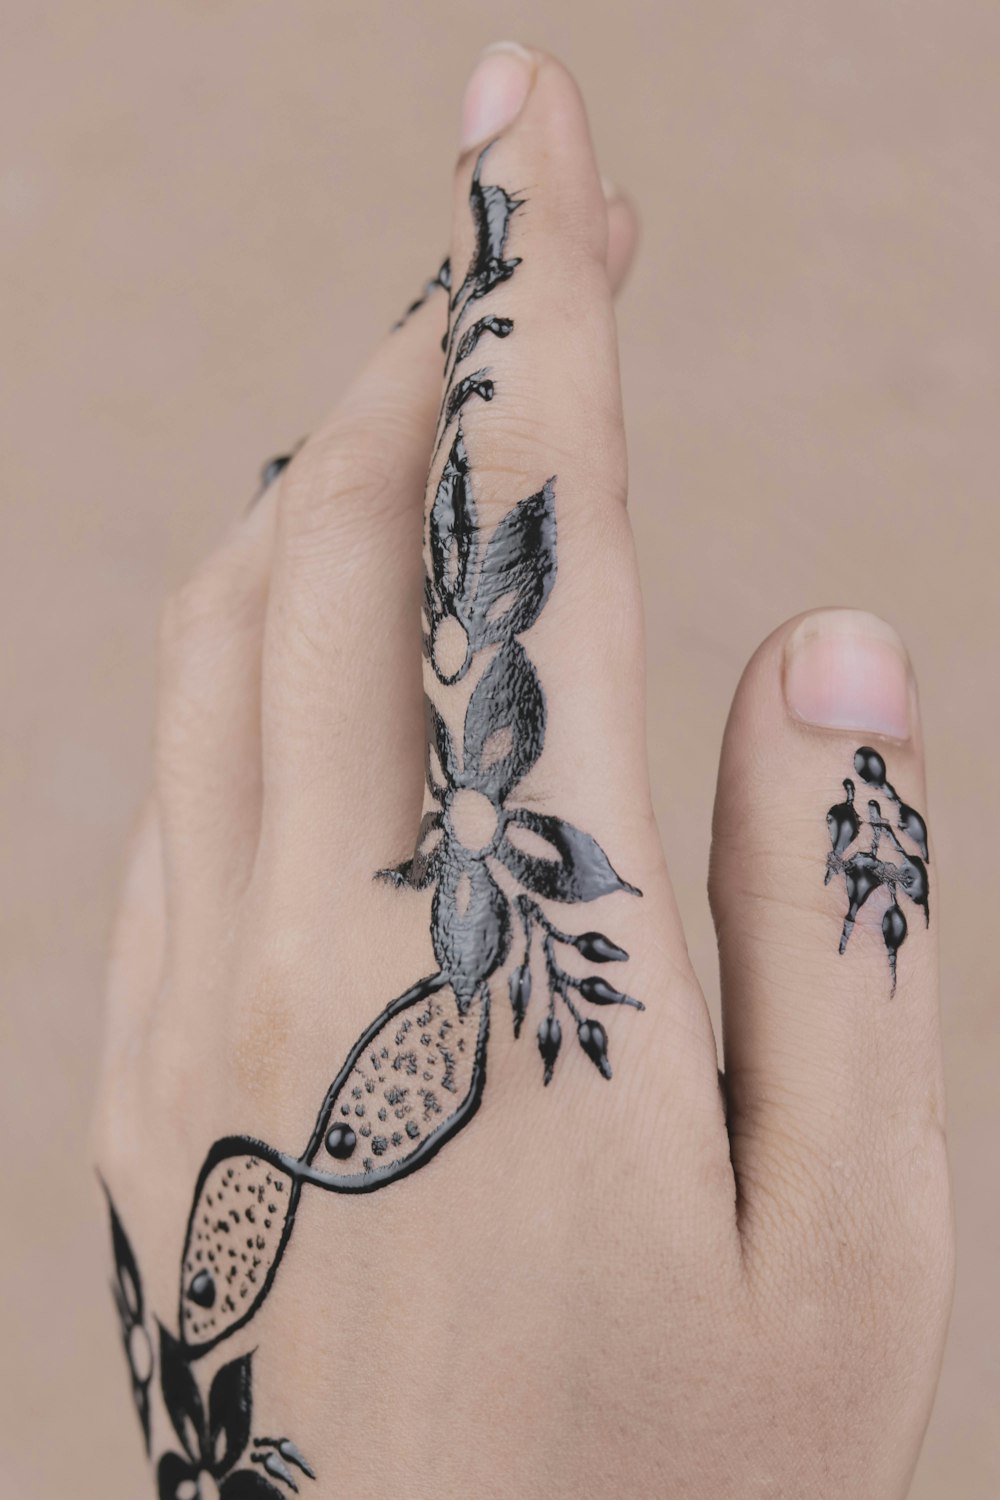 person's left hand with tattoo